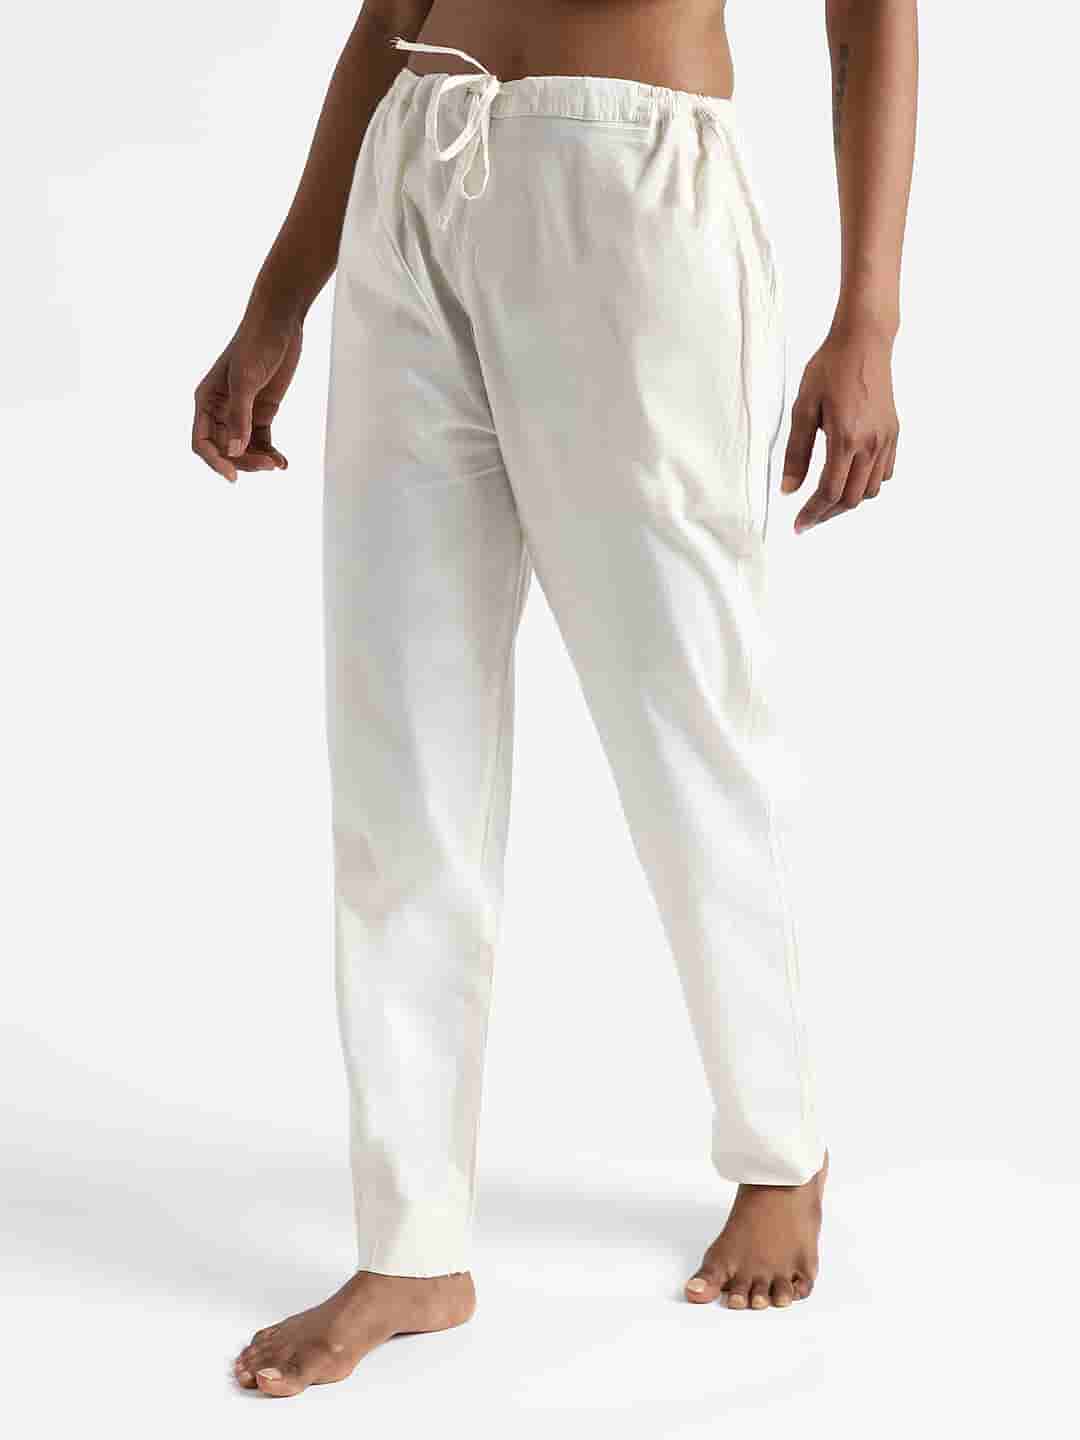 Organic Cotton & Natural Dyed Women’s Raw White Color Slim Fit Pants by Livbio